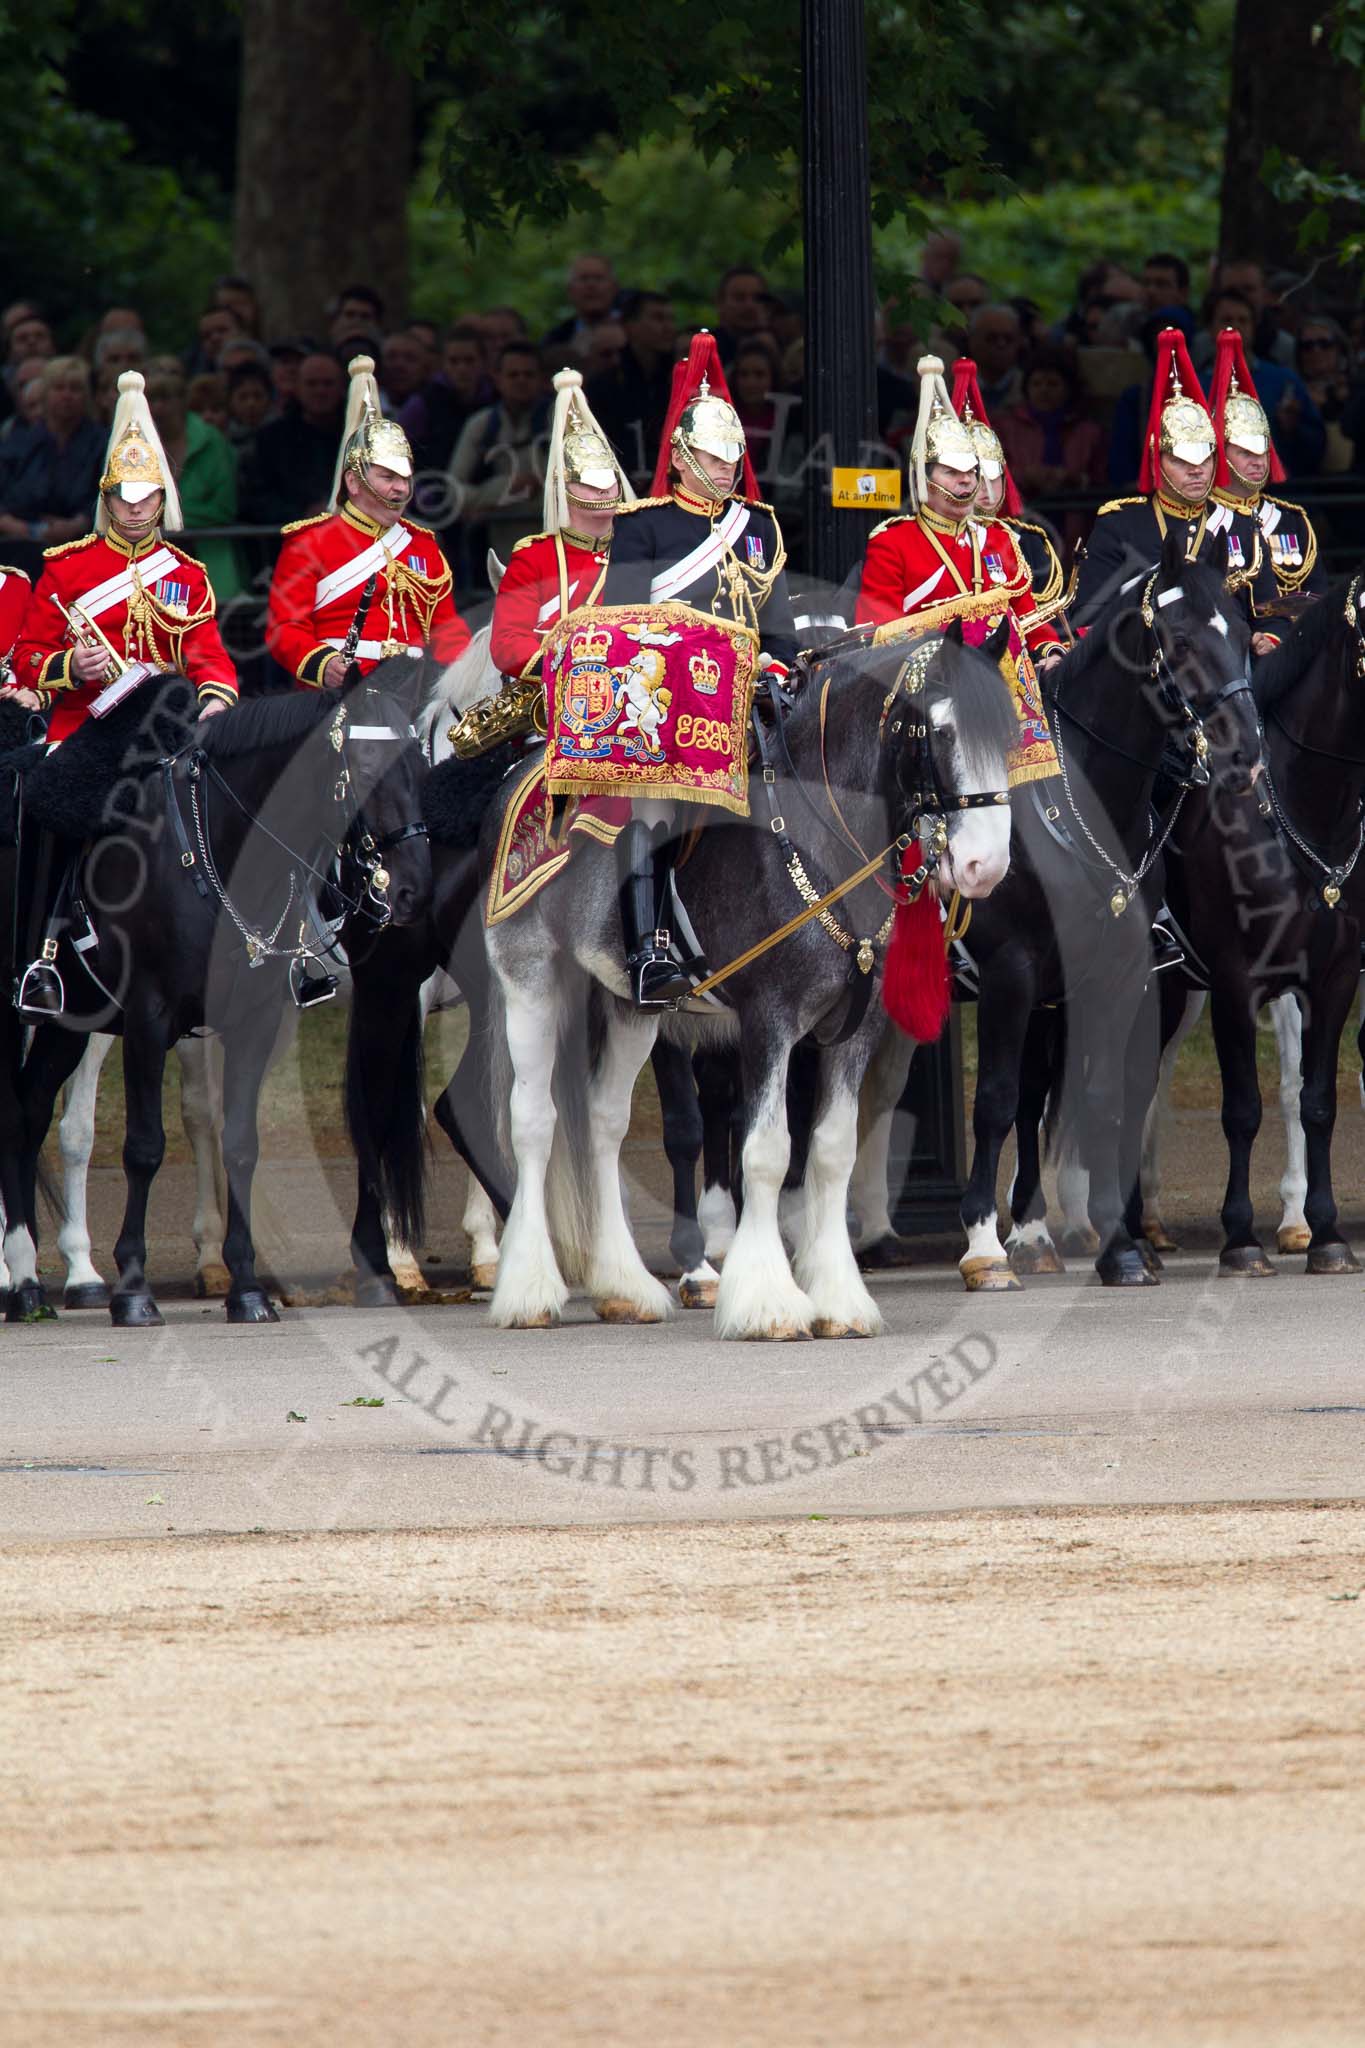 The Major General's Review 2011: The Mounted Bands of the Household Cavalry. With the red plumes, the and of the Blues and Royals, with the white plumes the Band of the Life Guards. In the middle the kettle drummer of The Blues and Royals..
Horse Guards Parade, Westminster,
London SW1,
Greater London,
United Kingdom,
on 28 May 2011 at 11:30, image #187